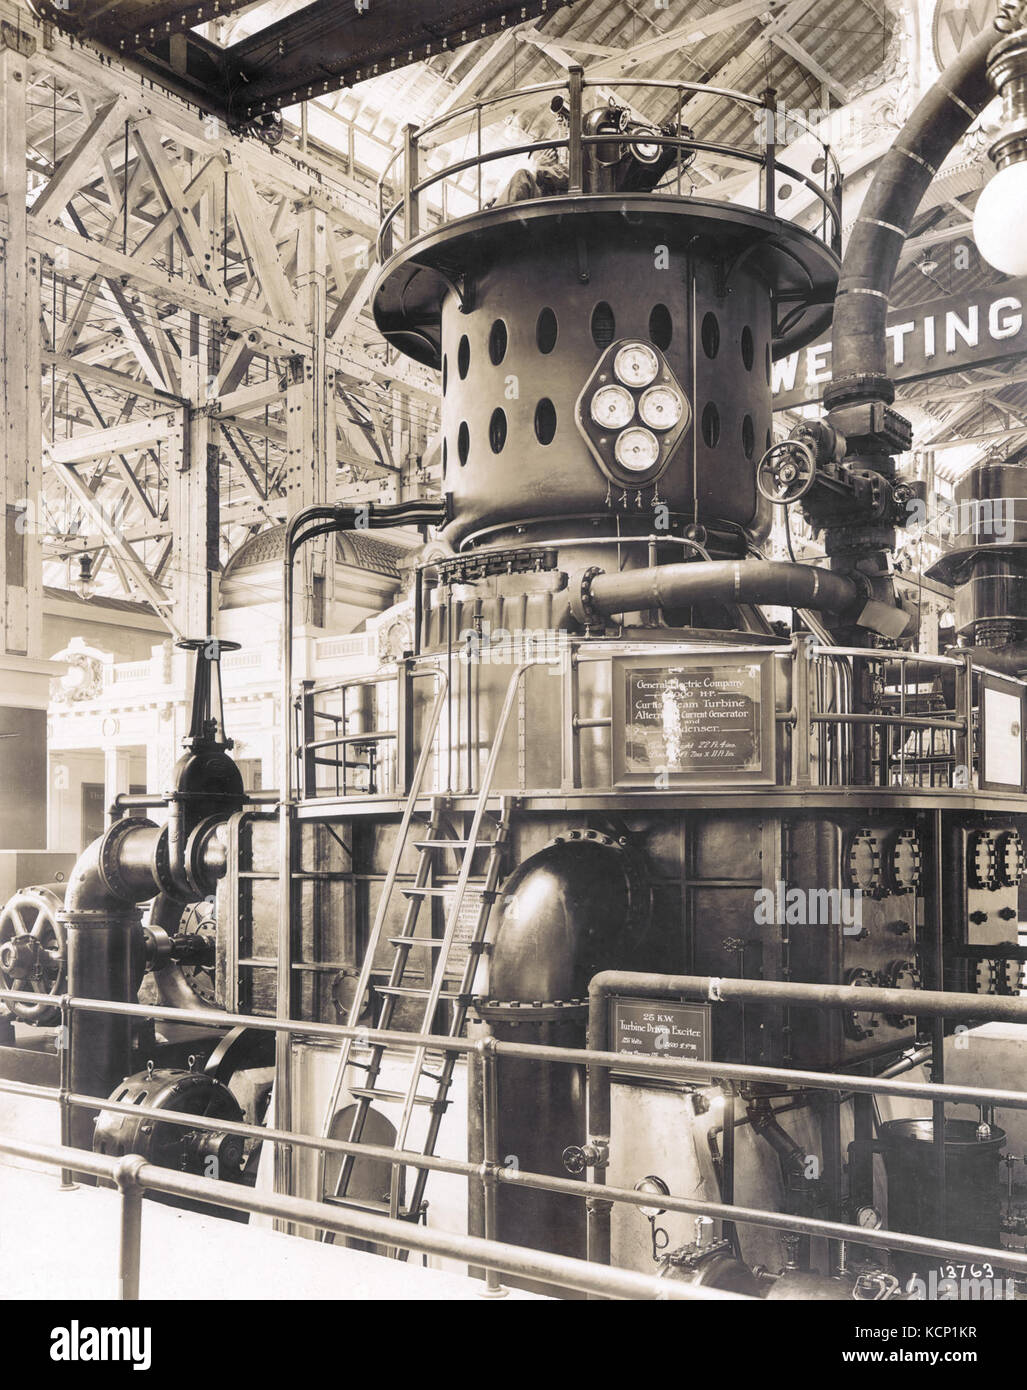 General Electric Company exhibit including a 3000 horsepower Steam Turbine and 200 kilowatt alternator in the Palace of Machinery at the 1904 World's Fair Stock Photo